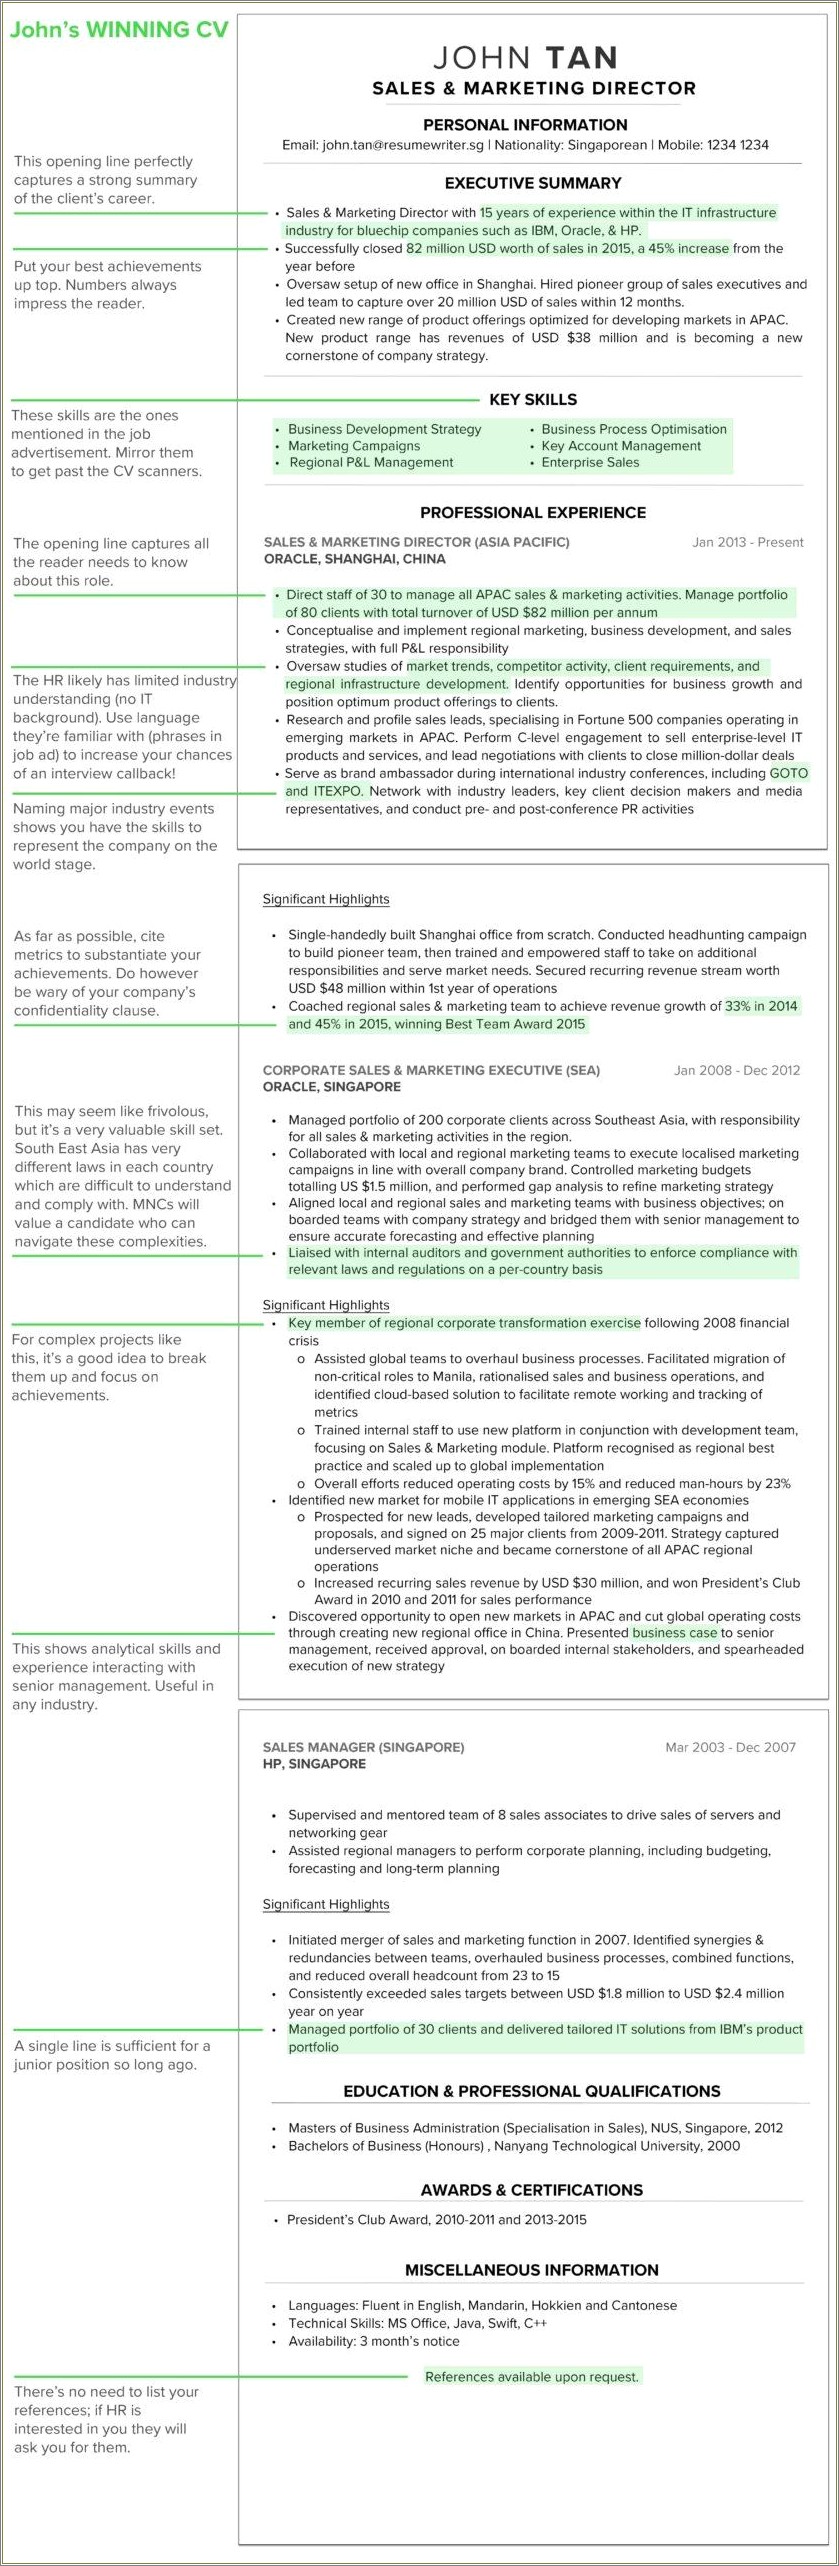 Putting Reduction In Force On Resume